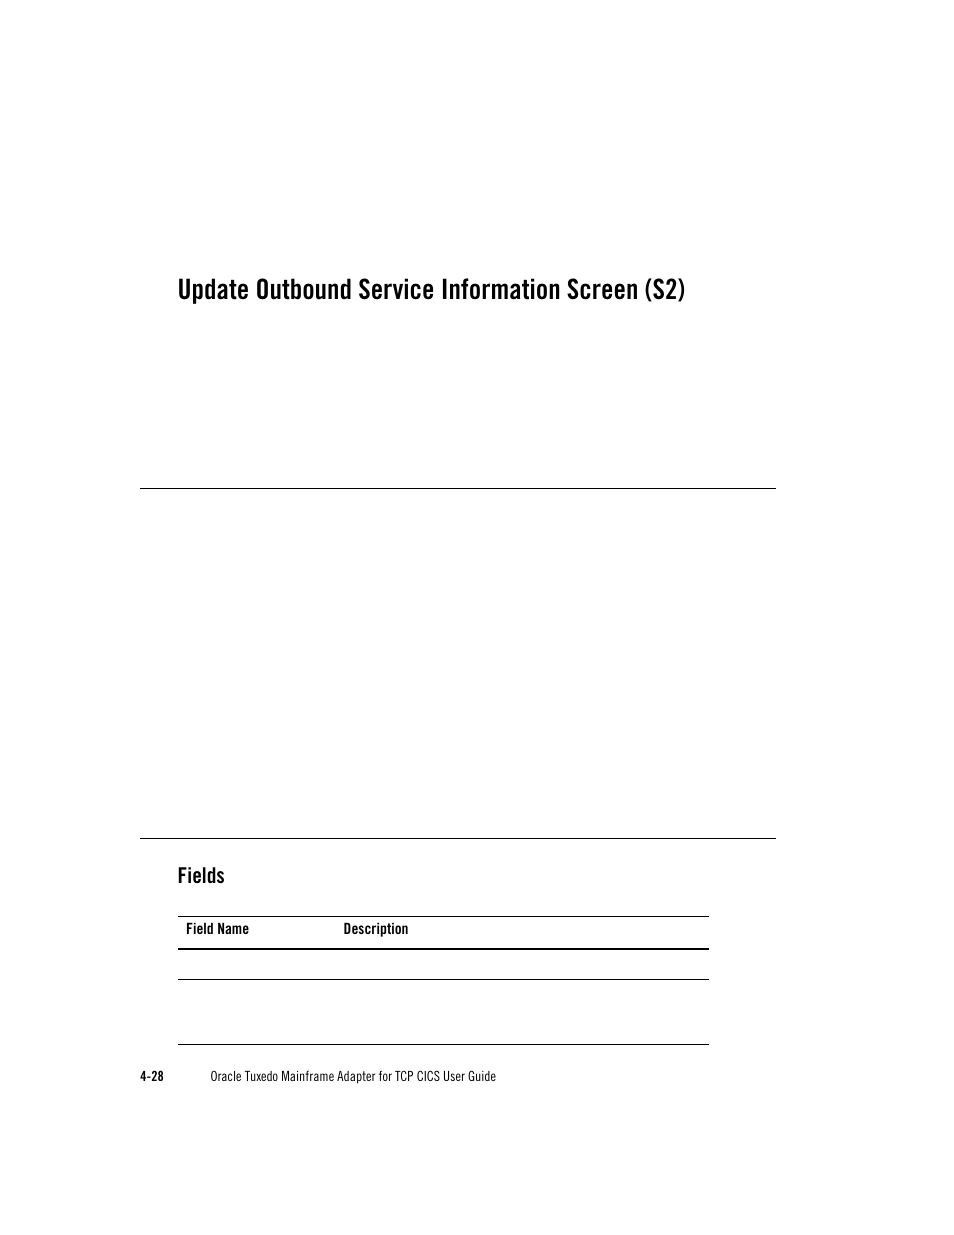 Update outbound service information screen (s2), Fields | Oracle Audio Technologies Oracle Tuxedo User Manual | Page 62 / 112